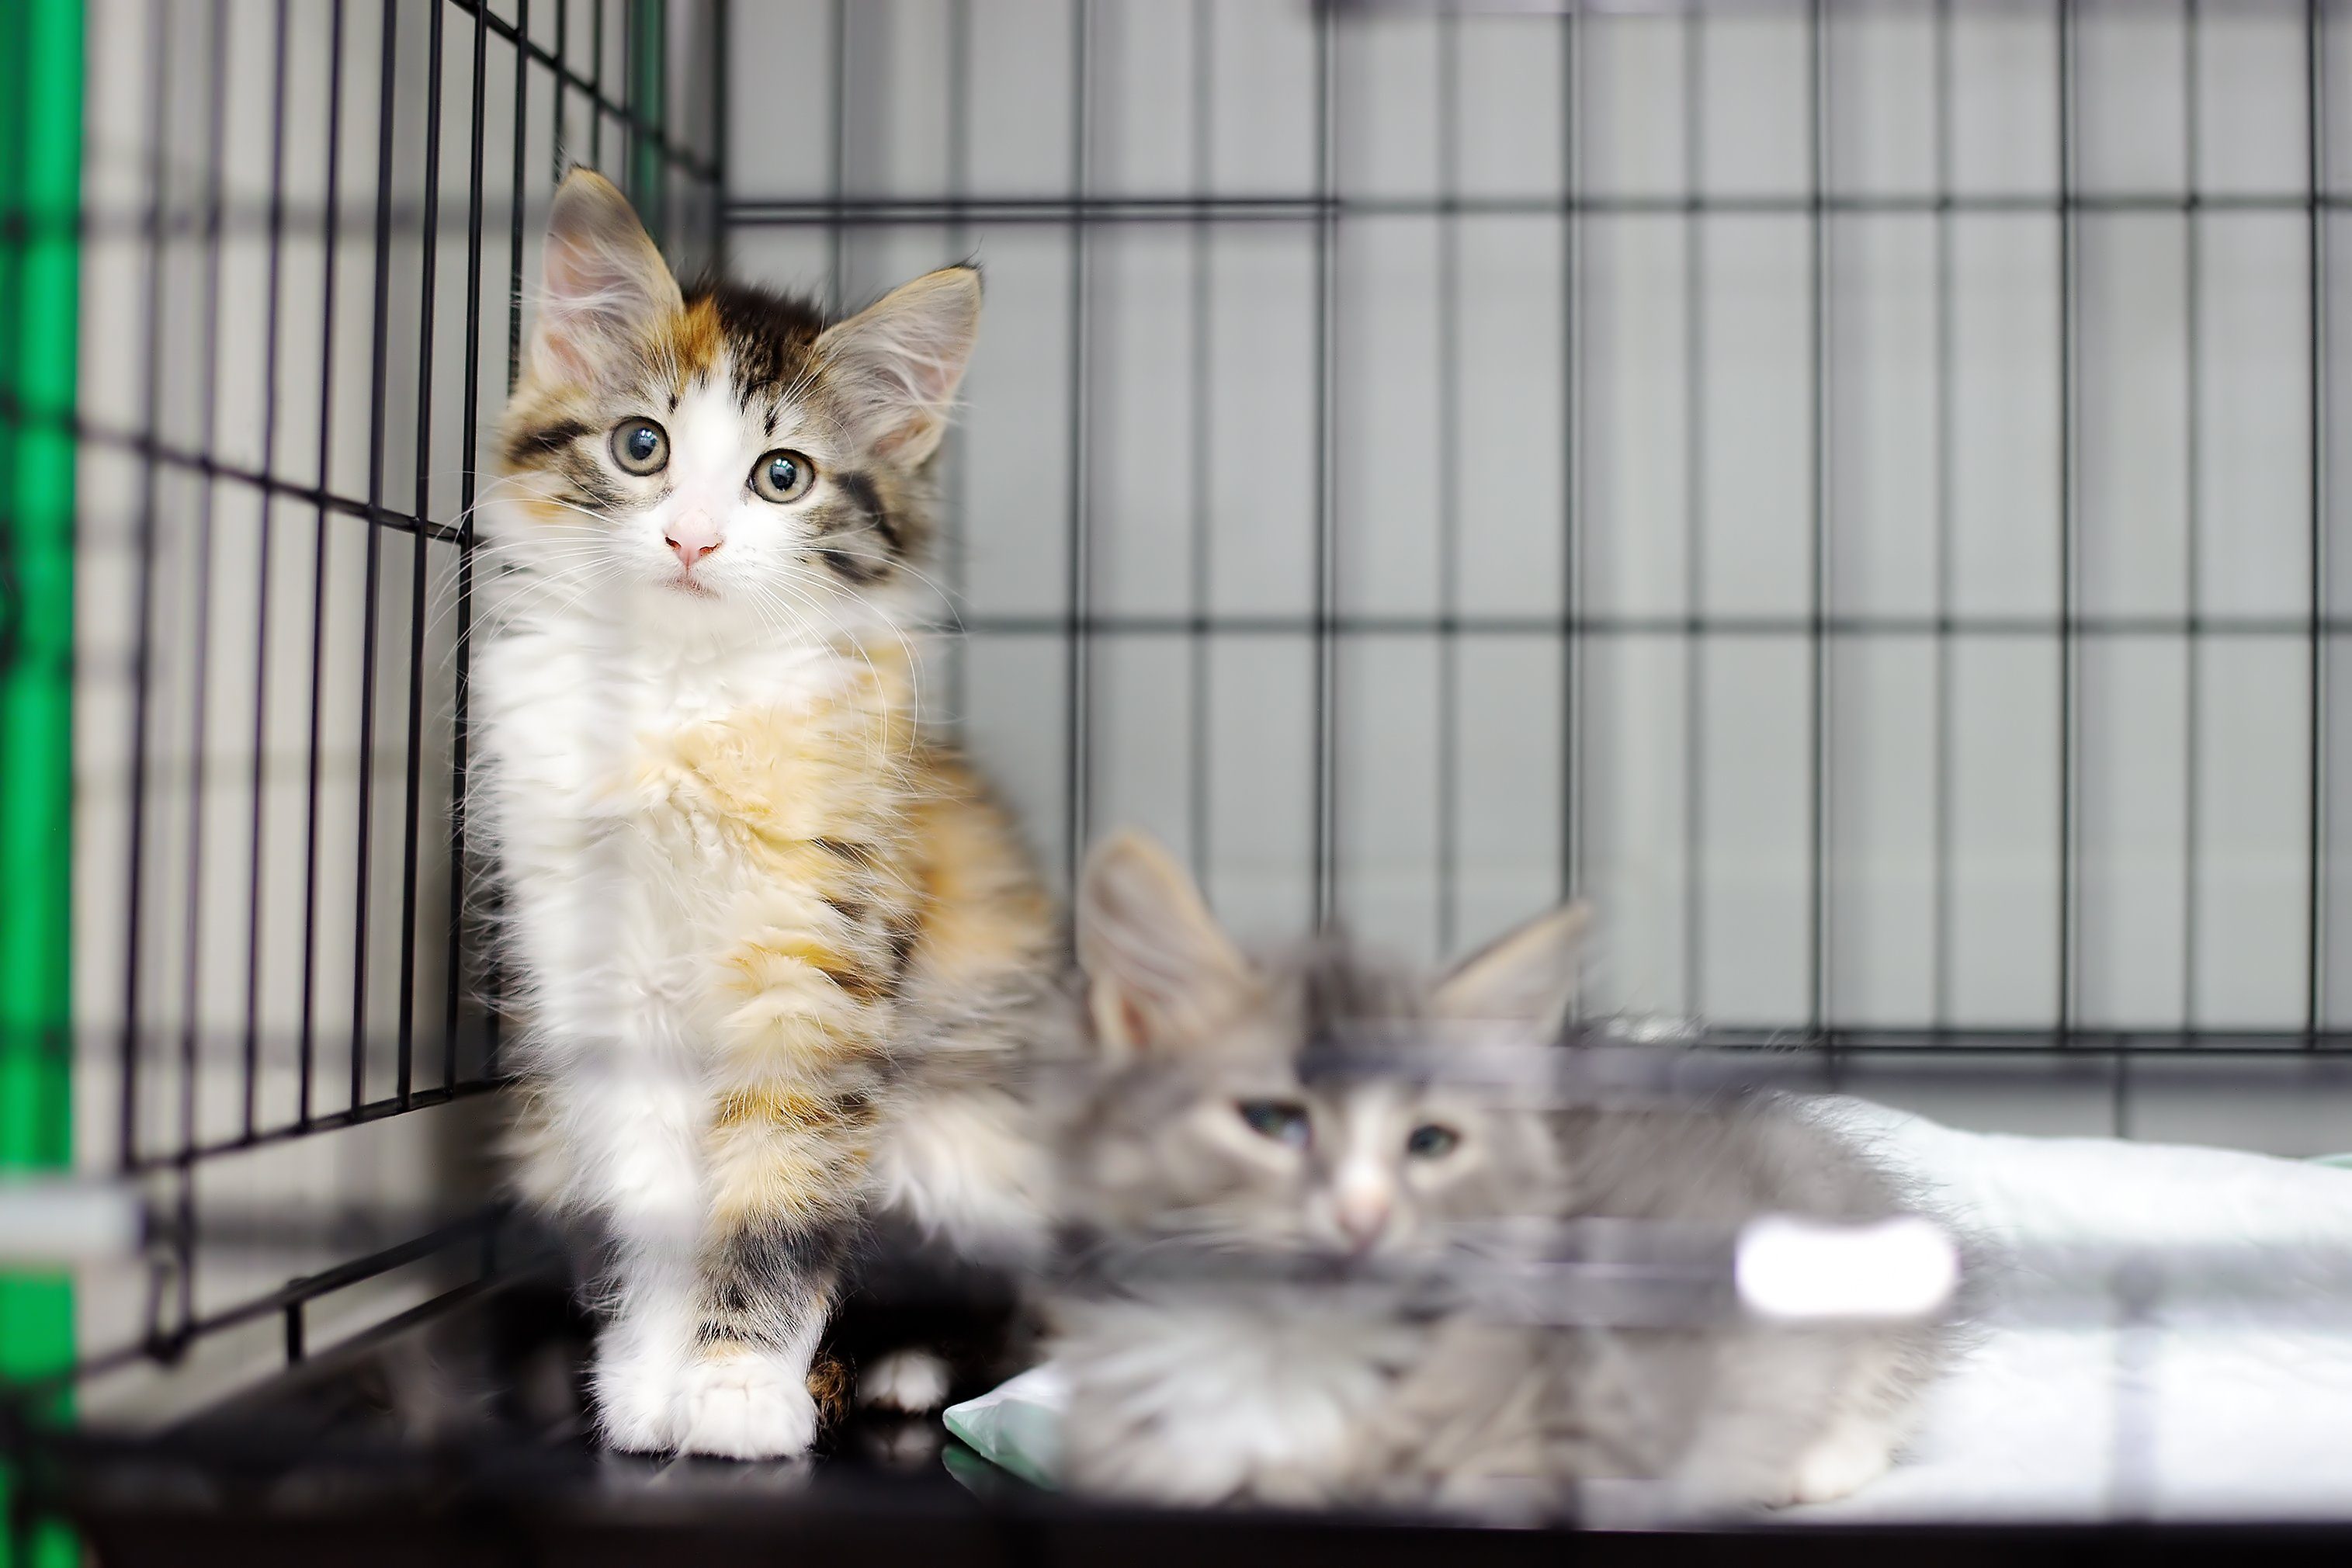 Two kittens in a cage in an animal shelter